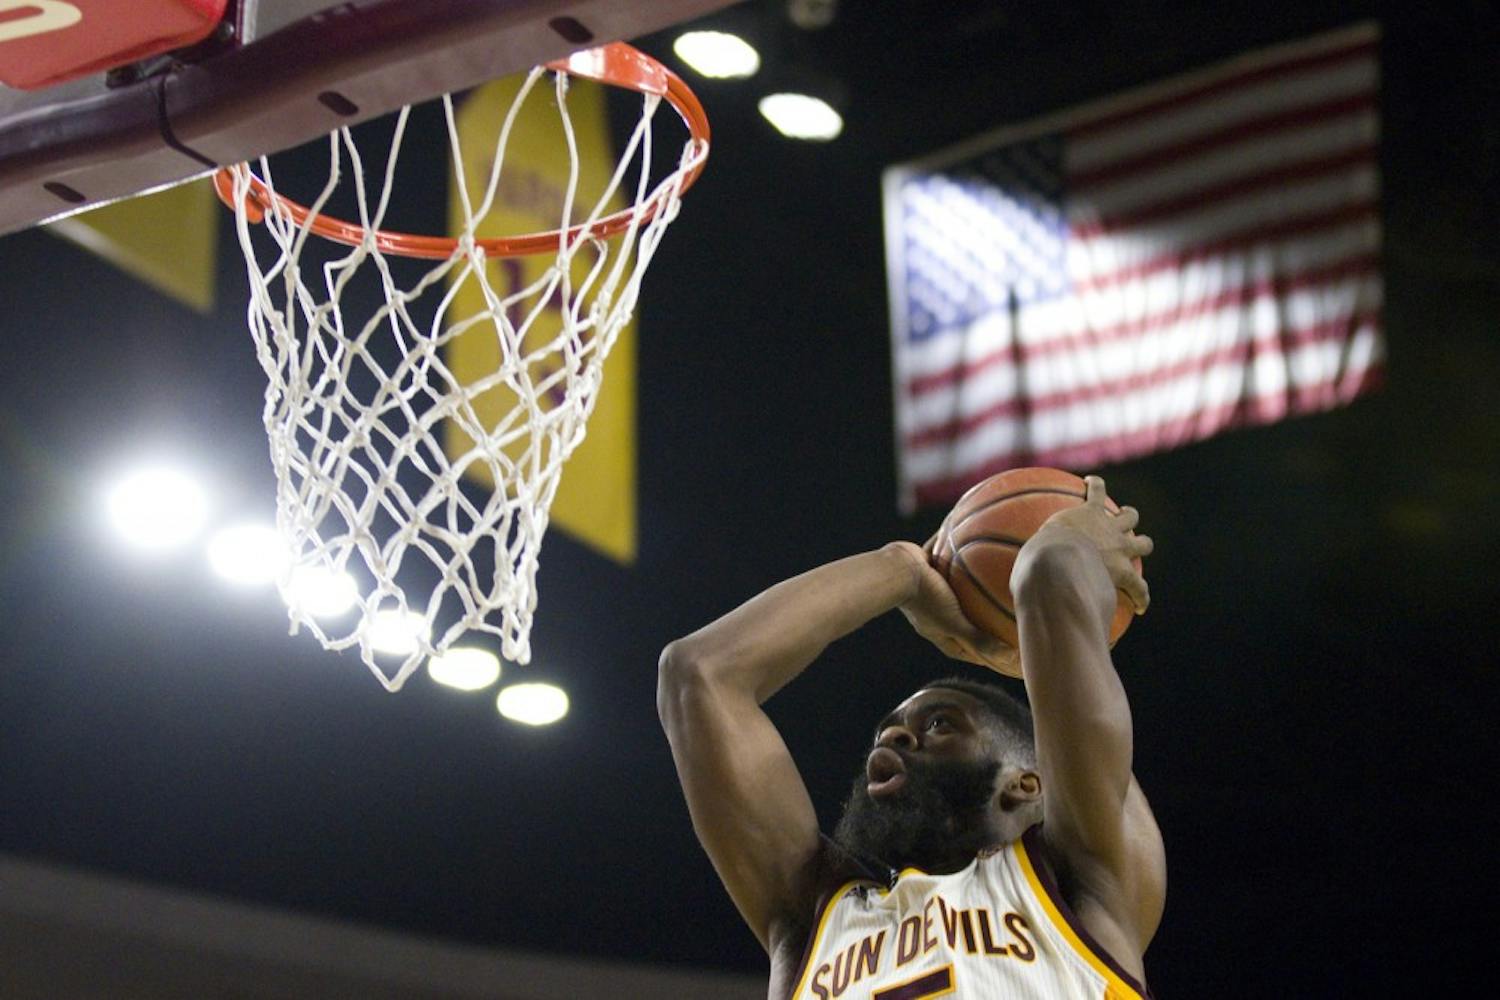 ASU senior forward Obinna Oleka (5) dunks the basketball after a steal during a men's basketball game against the Washington State Cougars in Wells Fargo Arena in Tempe, Arizona on Sunday, Jan. 29, 2017. ASU lost 91-83. (Josh Orcutt/State Press)